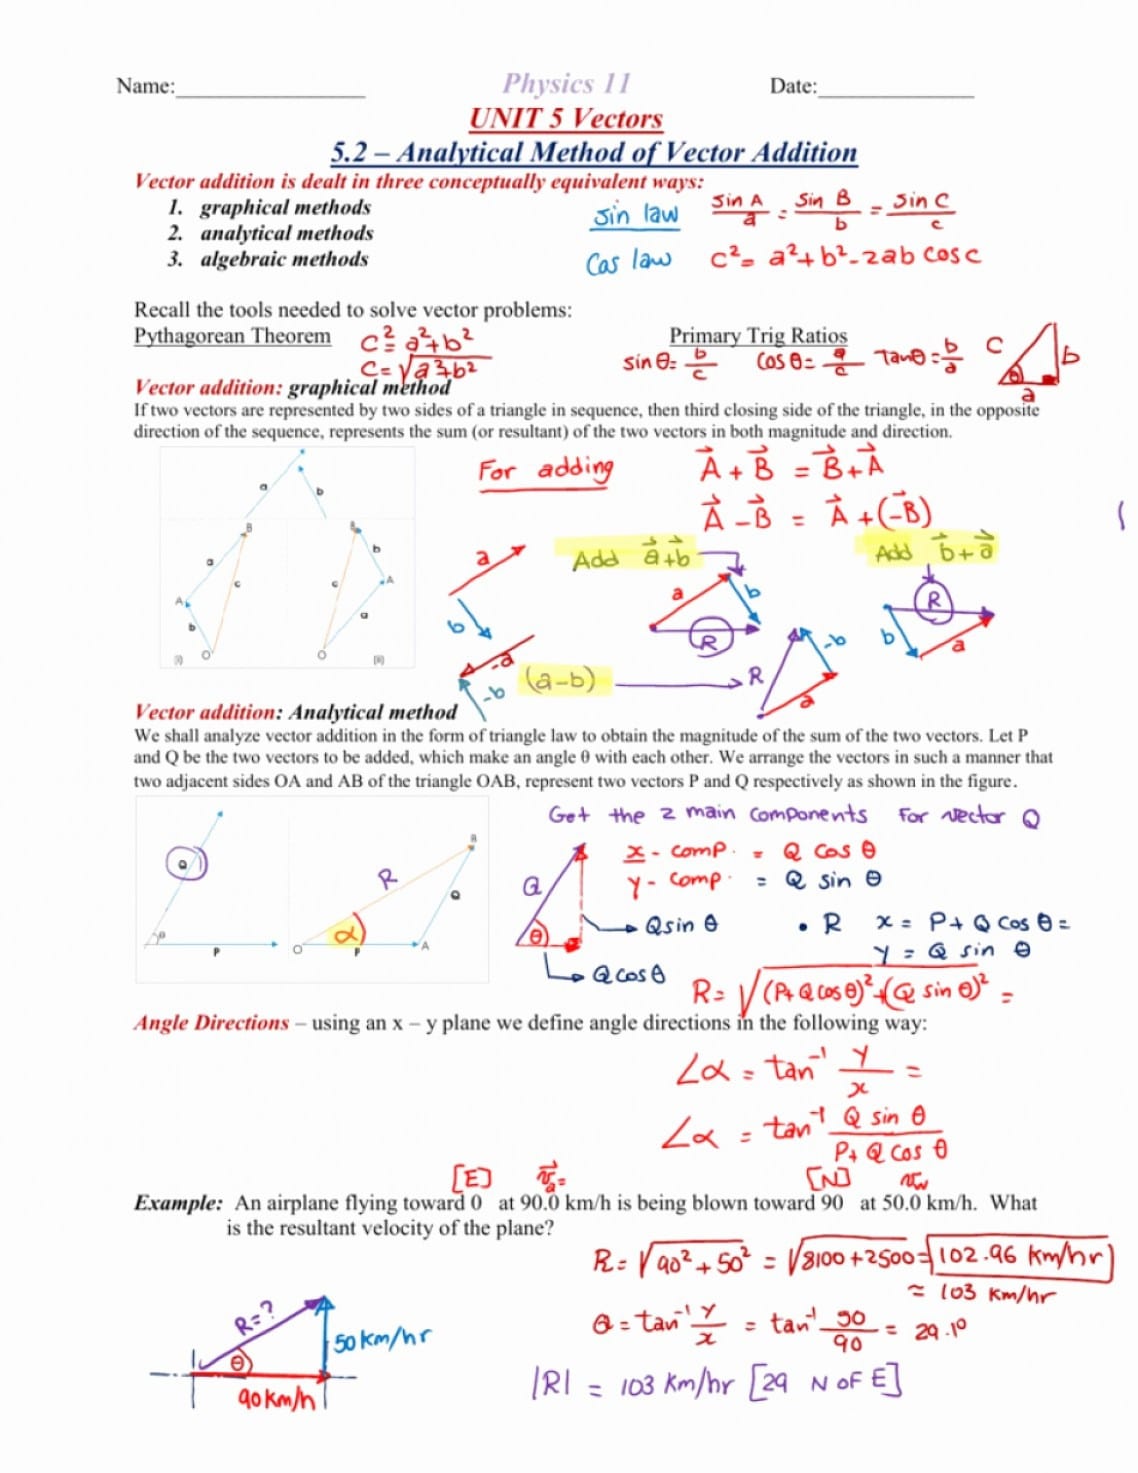 Two Dimensional Motion And Vectors Worksheet Answers Awesome db excel com